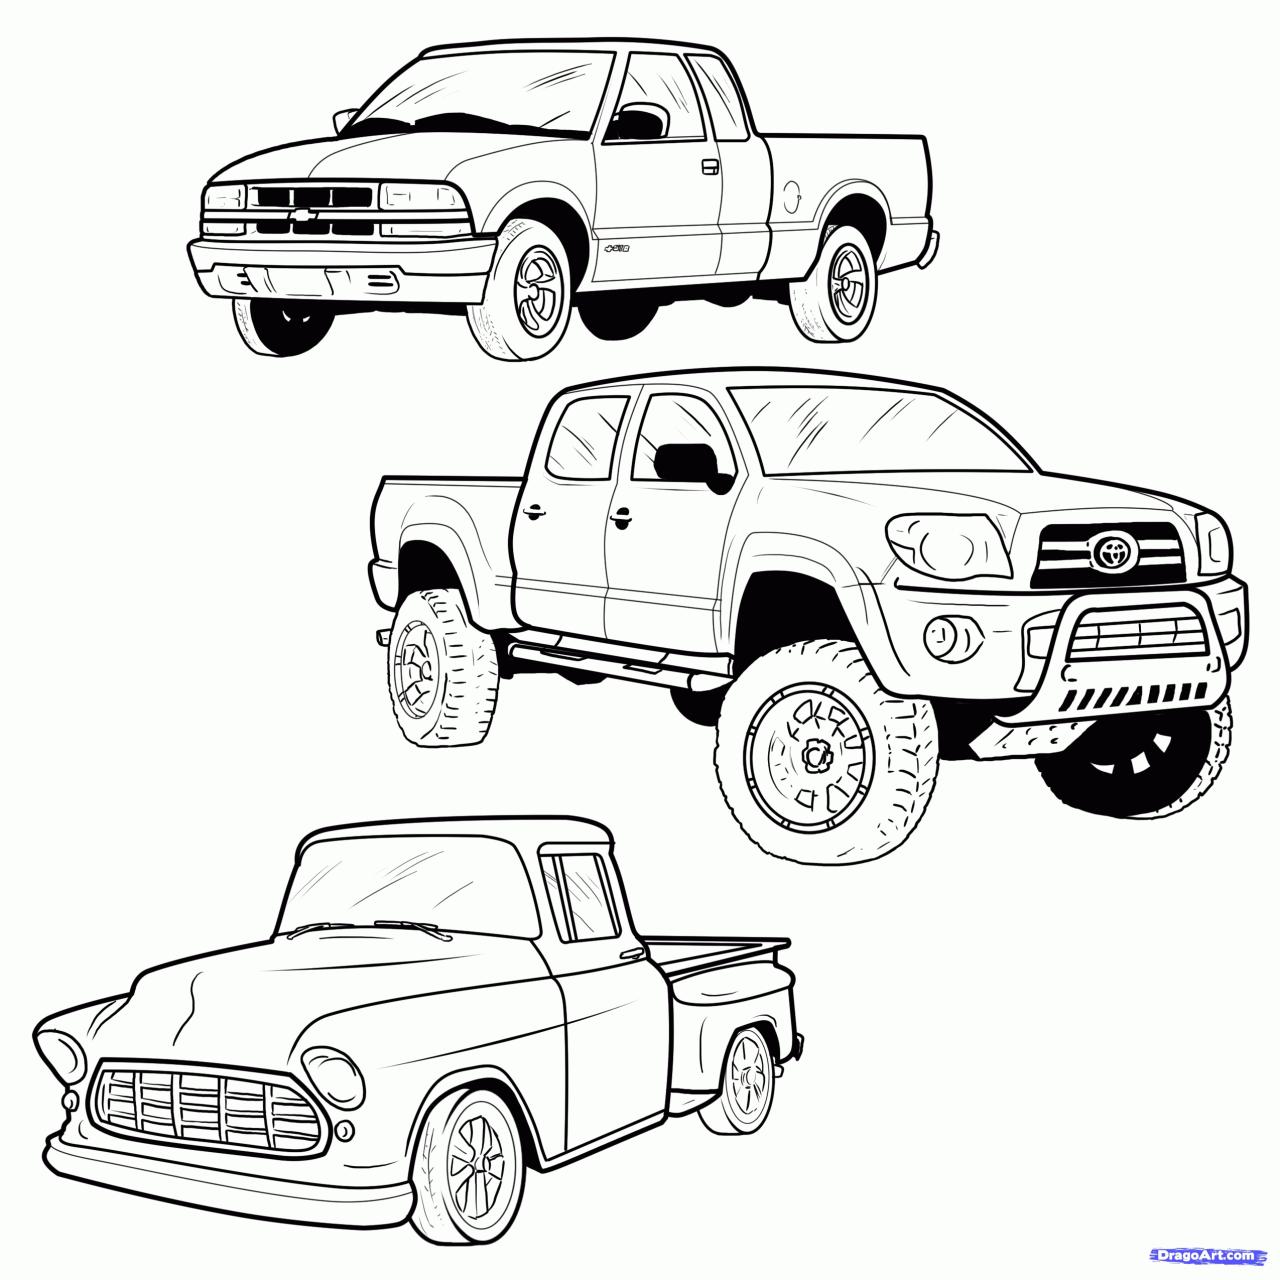 Dodge Truck Coloring Pages at Free printable